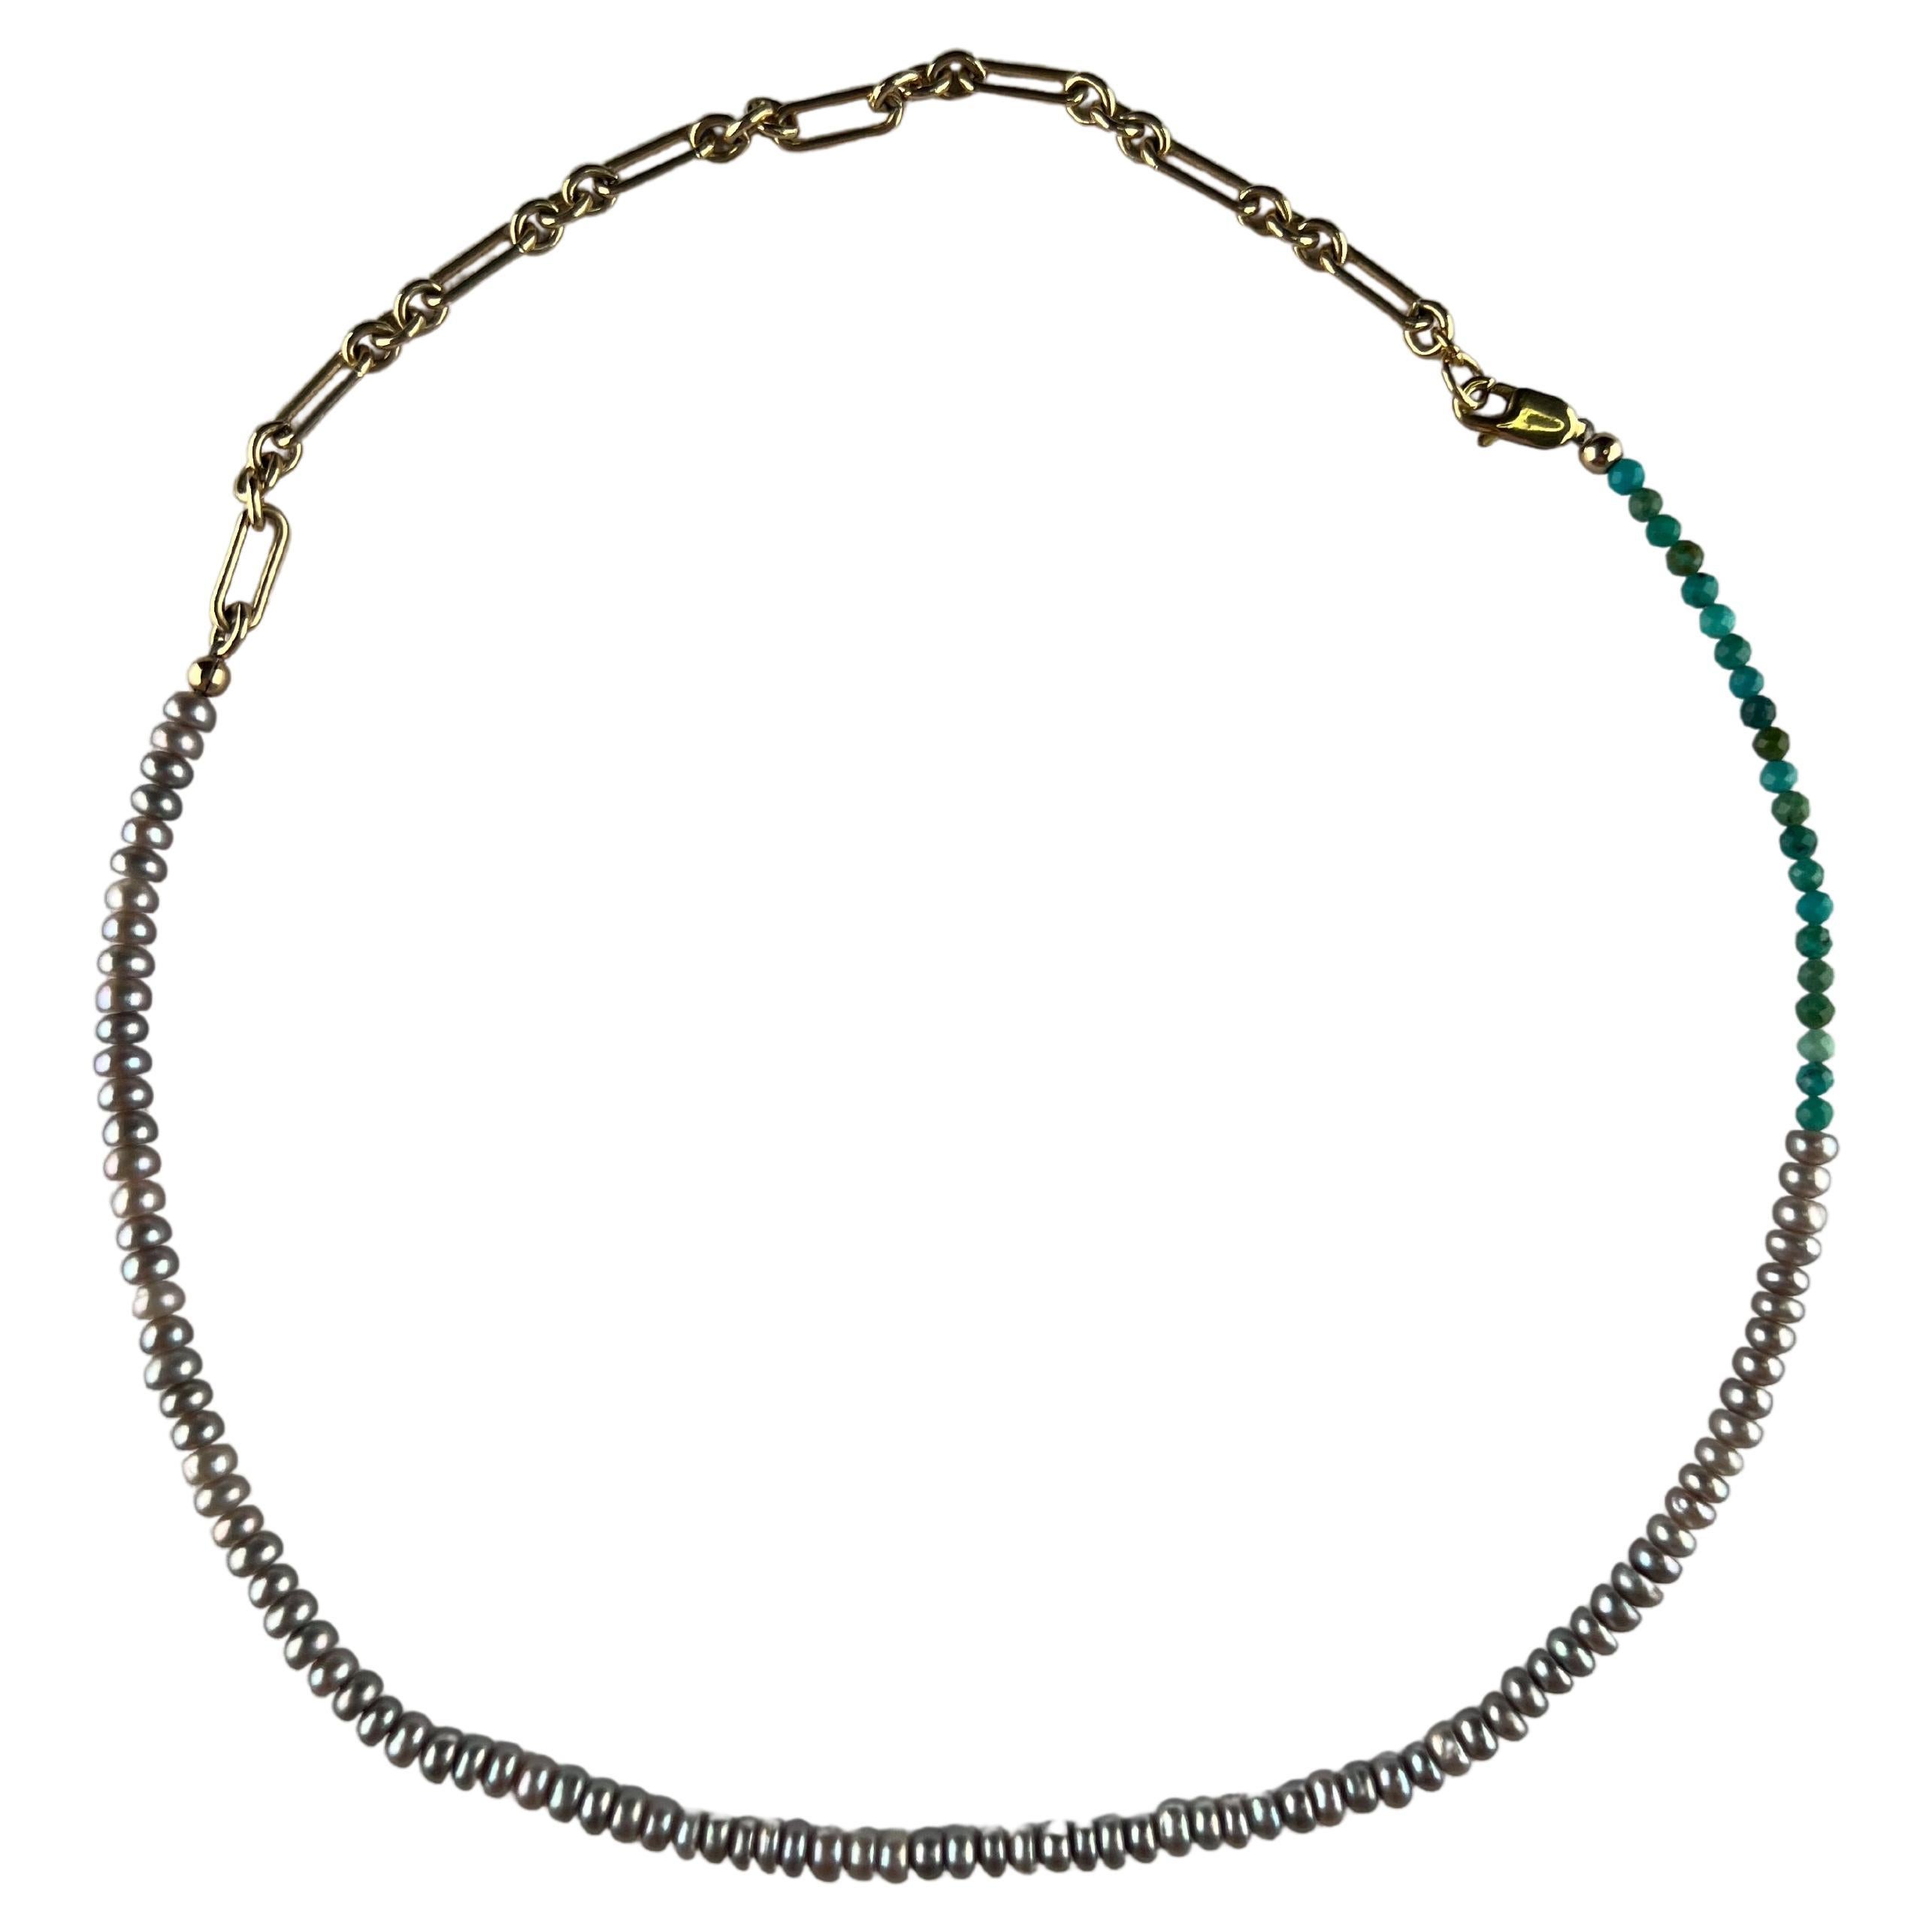 Pearl Necklace Silver Pearl Turquoise Choker Necklace By J Dauphin

